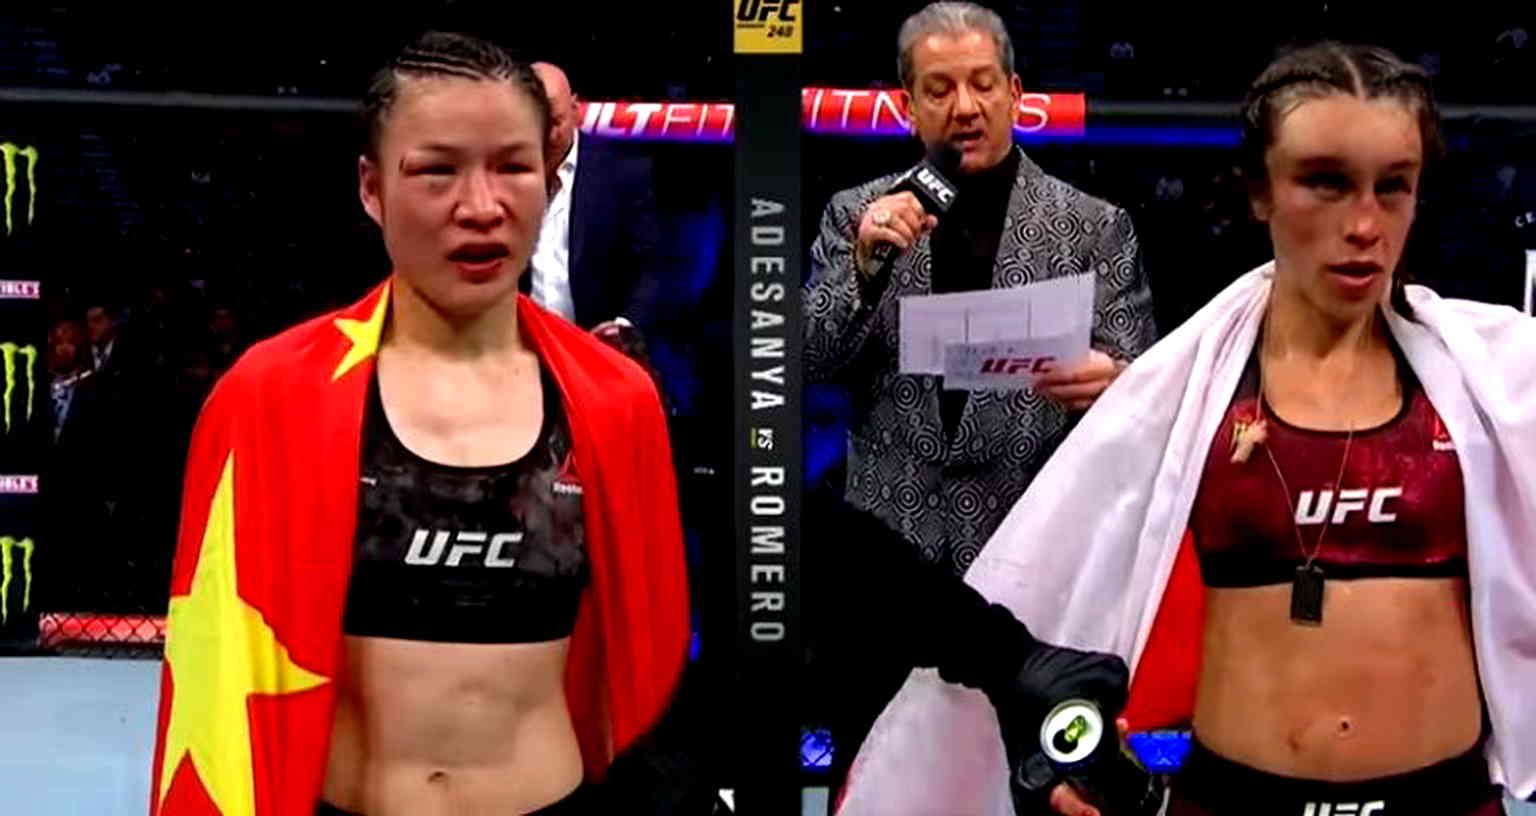 Chinese Champion Zhang Weili Defends UFC Title After Destroying Opponent